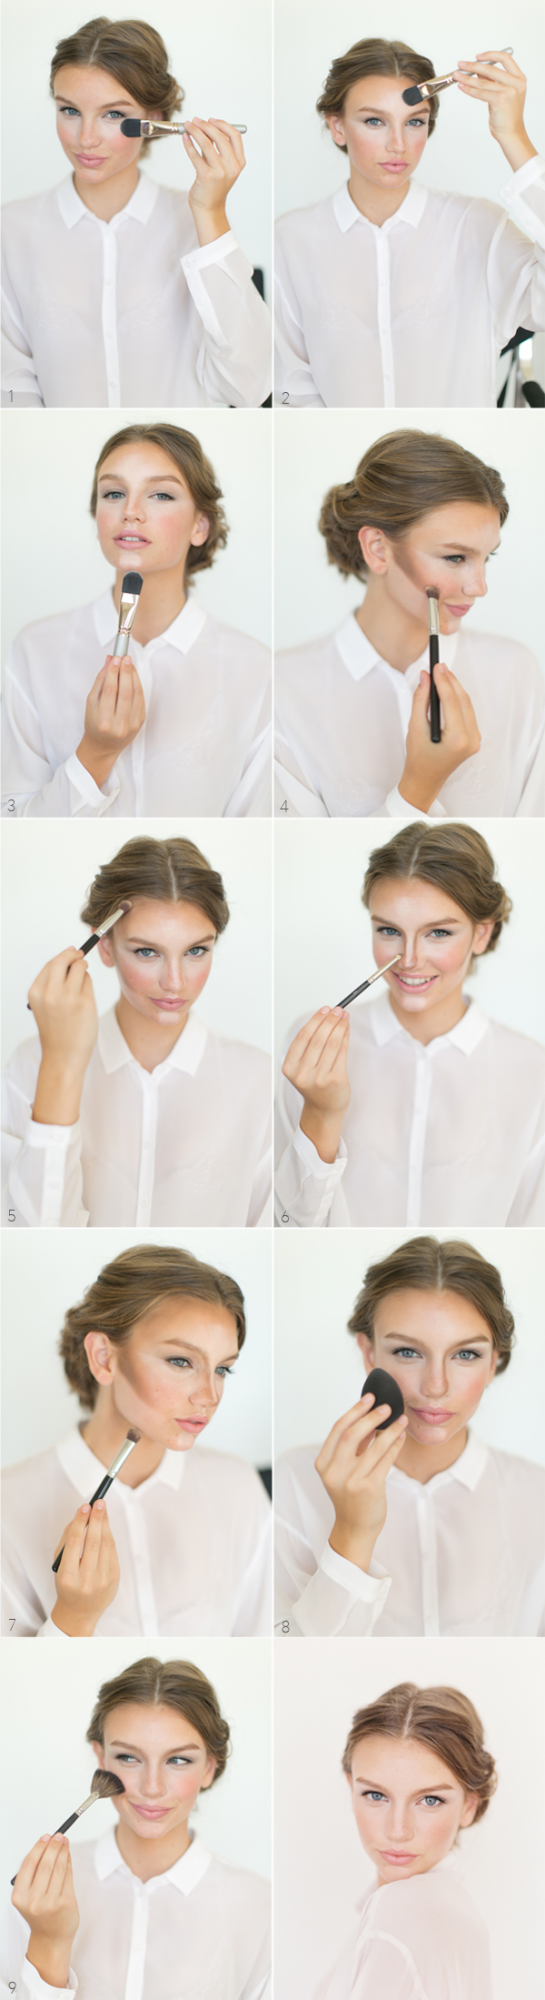 16 Makeup Tricks For Flawless Look Every Woman Should Know (1)